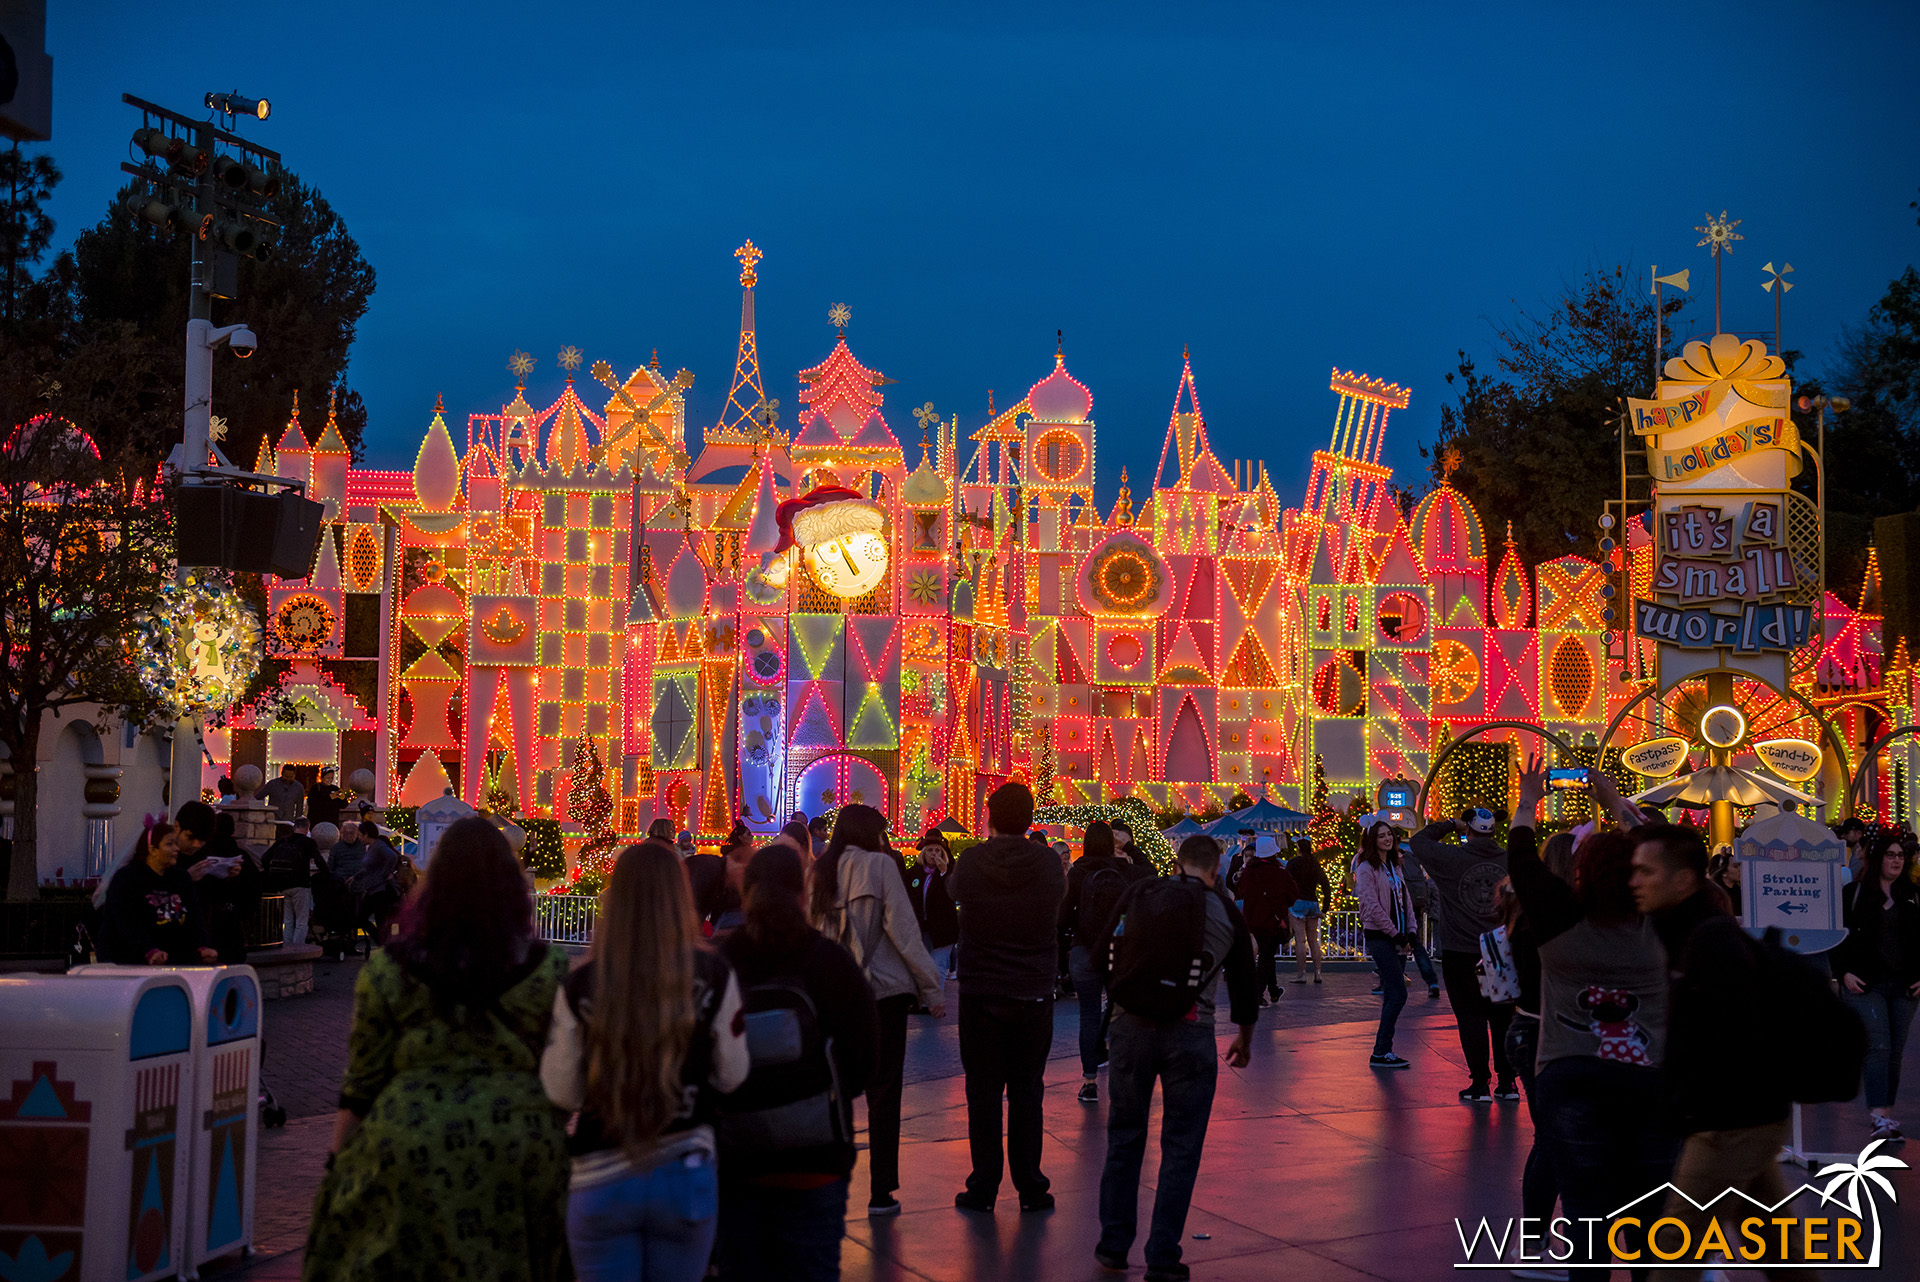  It’s a Small World is still Christmas-y. 